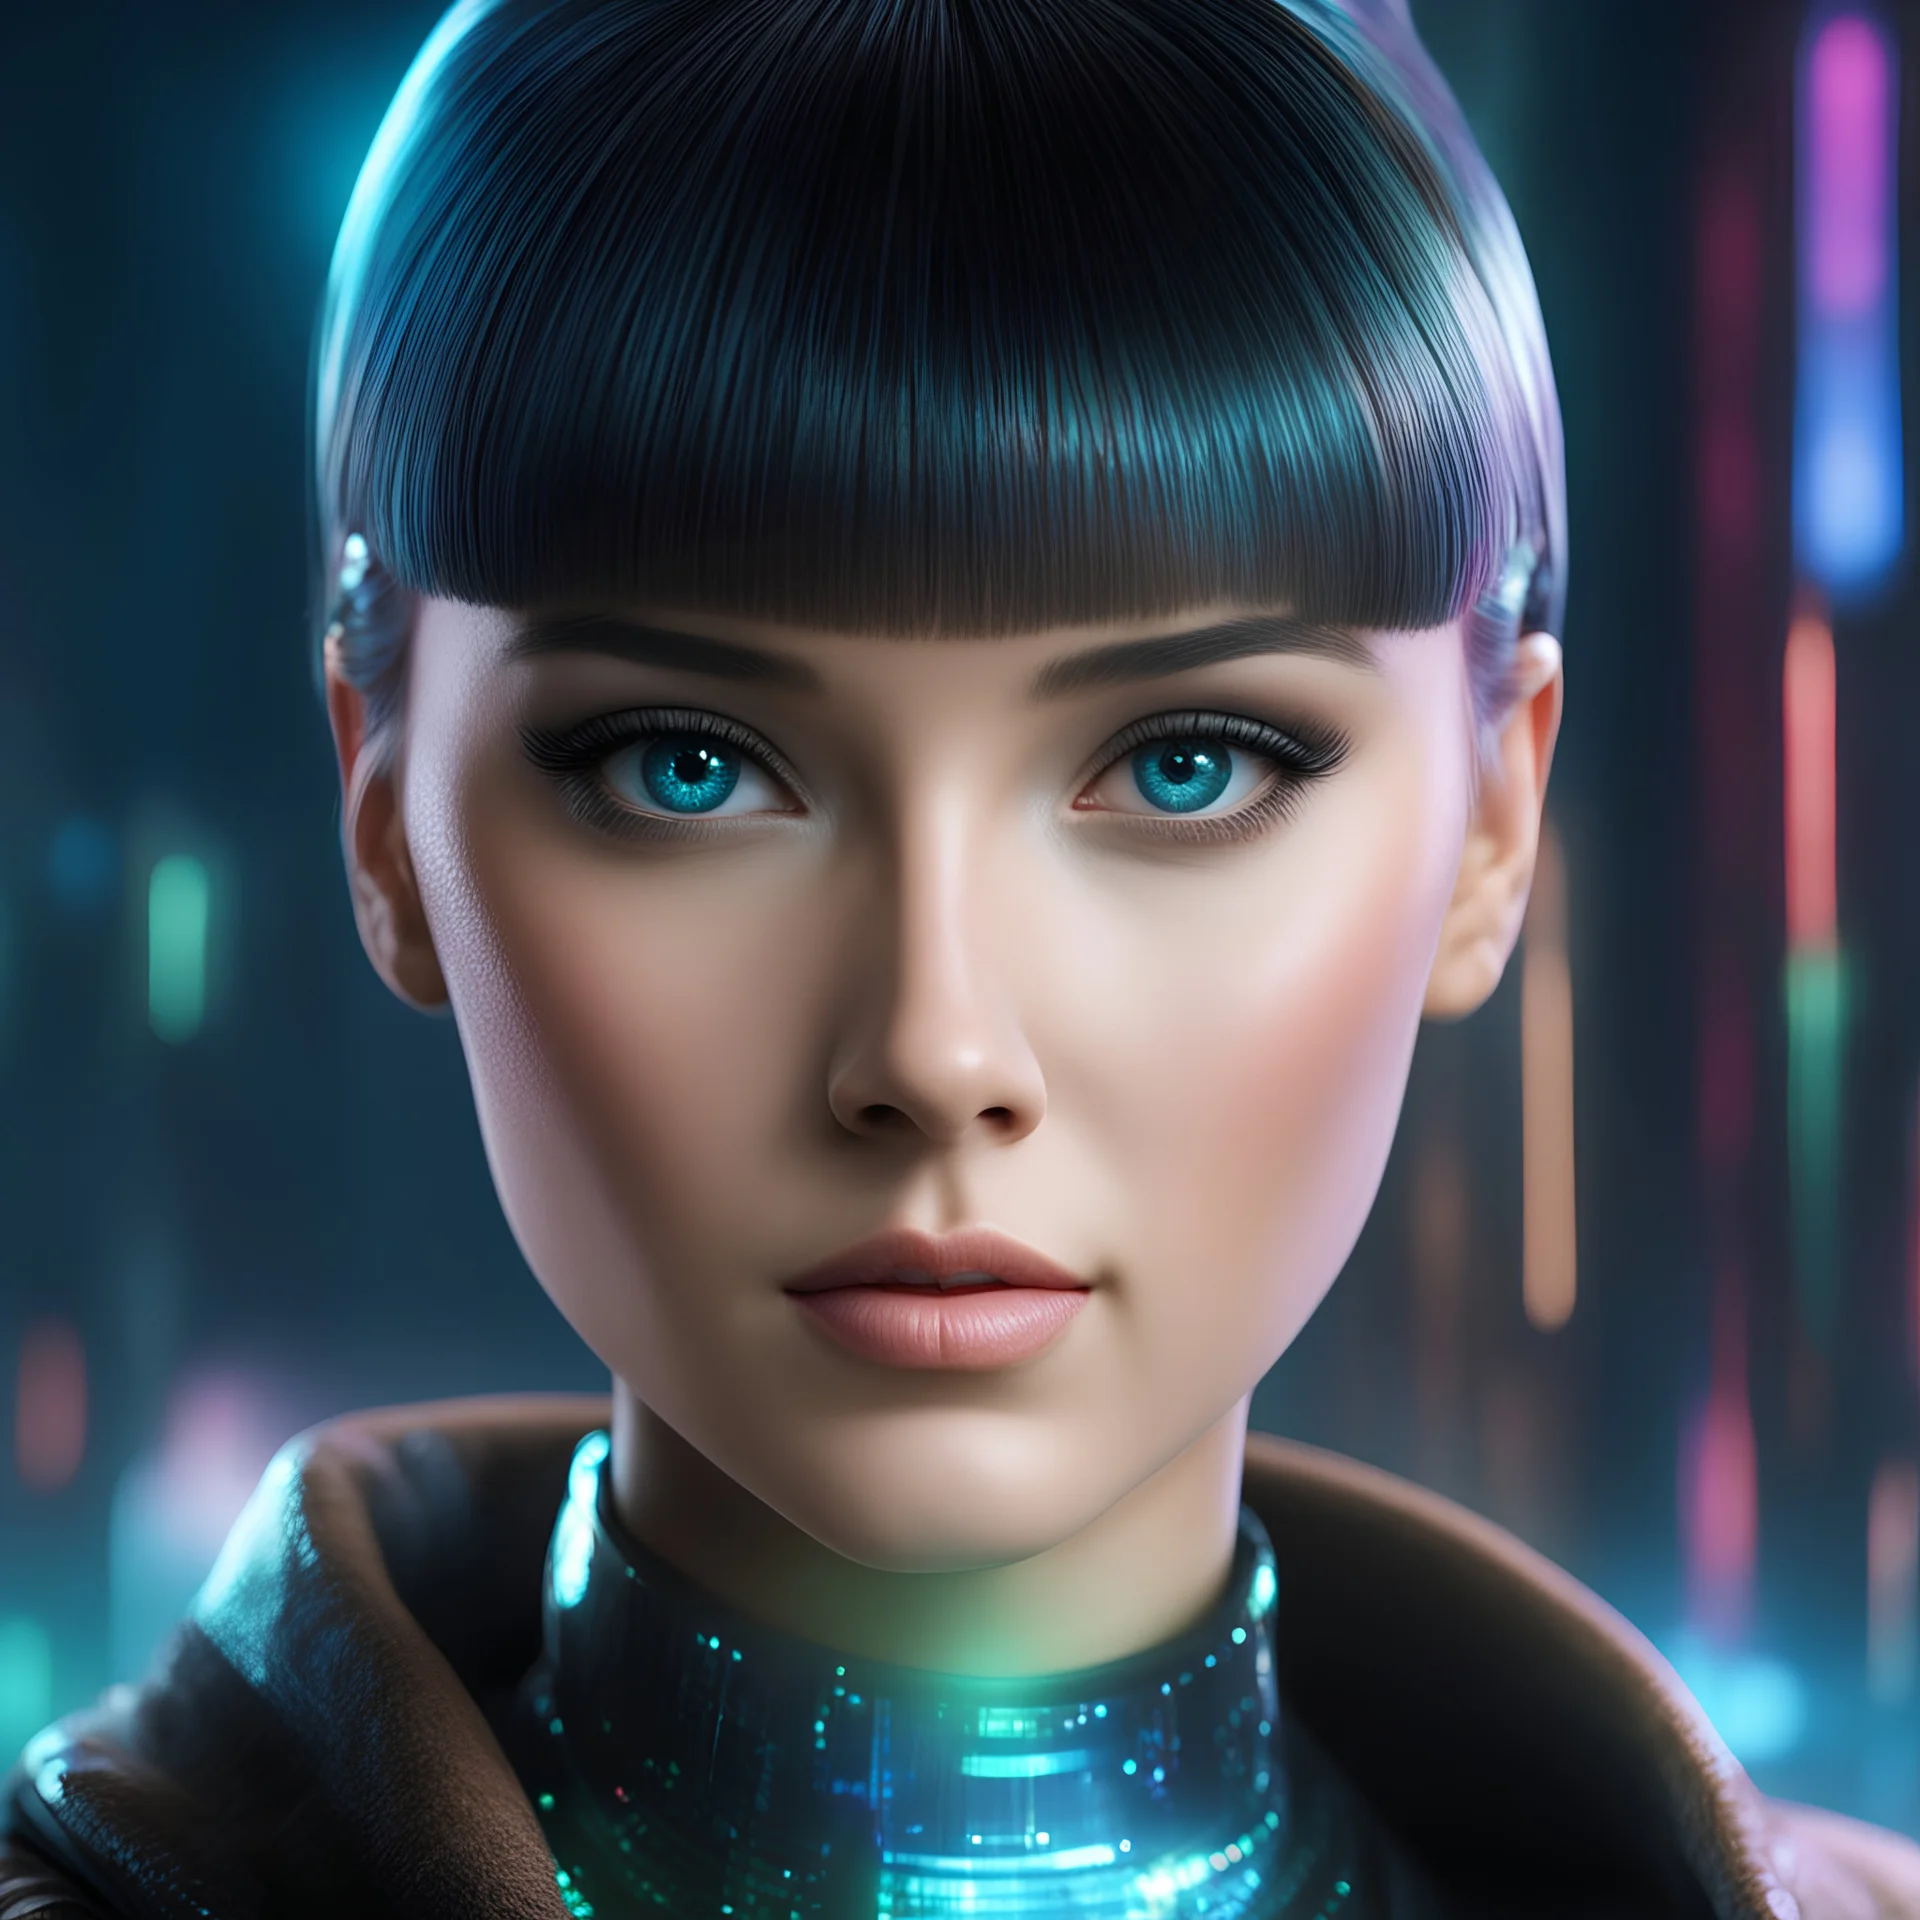 A holographic face similar to the AI holographic girl in Blade Runner movie, makes it look straight like it looking into the eyes of the user, you can use blurs and remove the background.